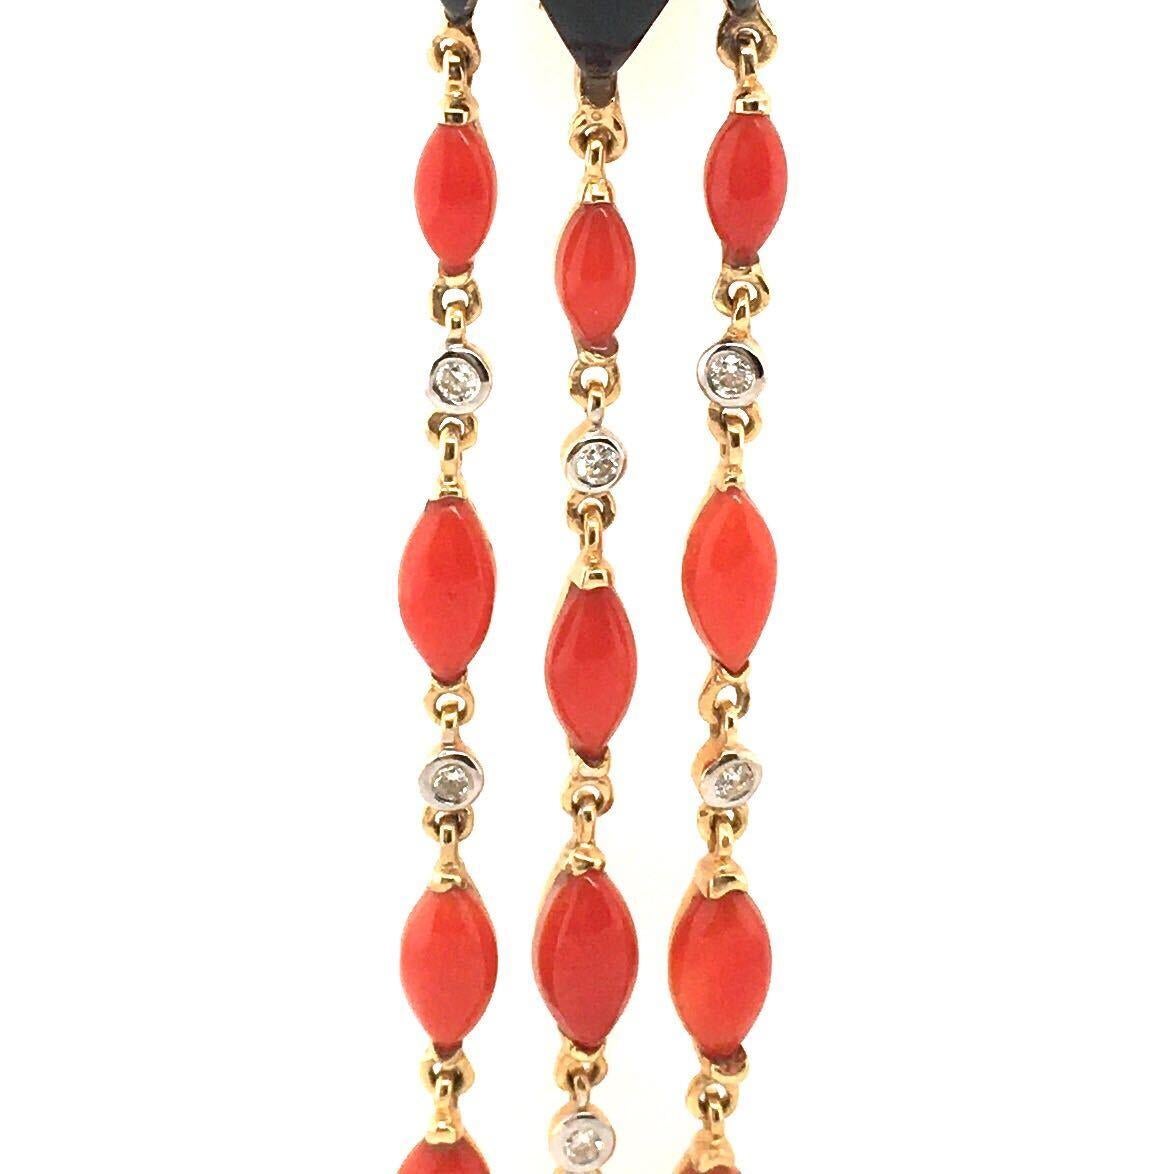 A pair of 18 karat yellow gold, orange-red coral, black onyx and diamond dangling earrings with collapsible posts & omega backs.  Each earring suspends three line pendants, each  set with five coral navettes and two circular cut diamonds, all joined